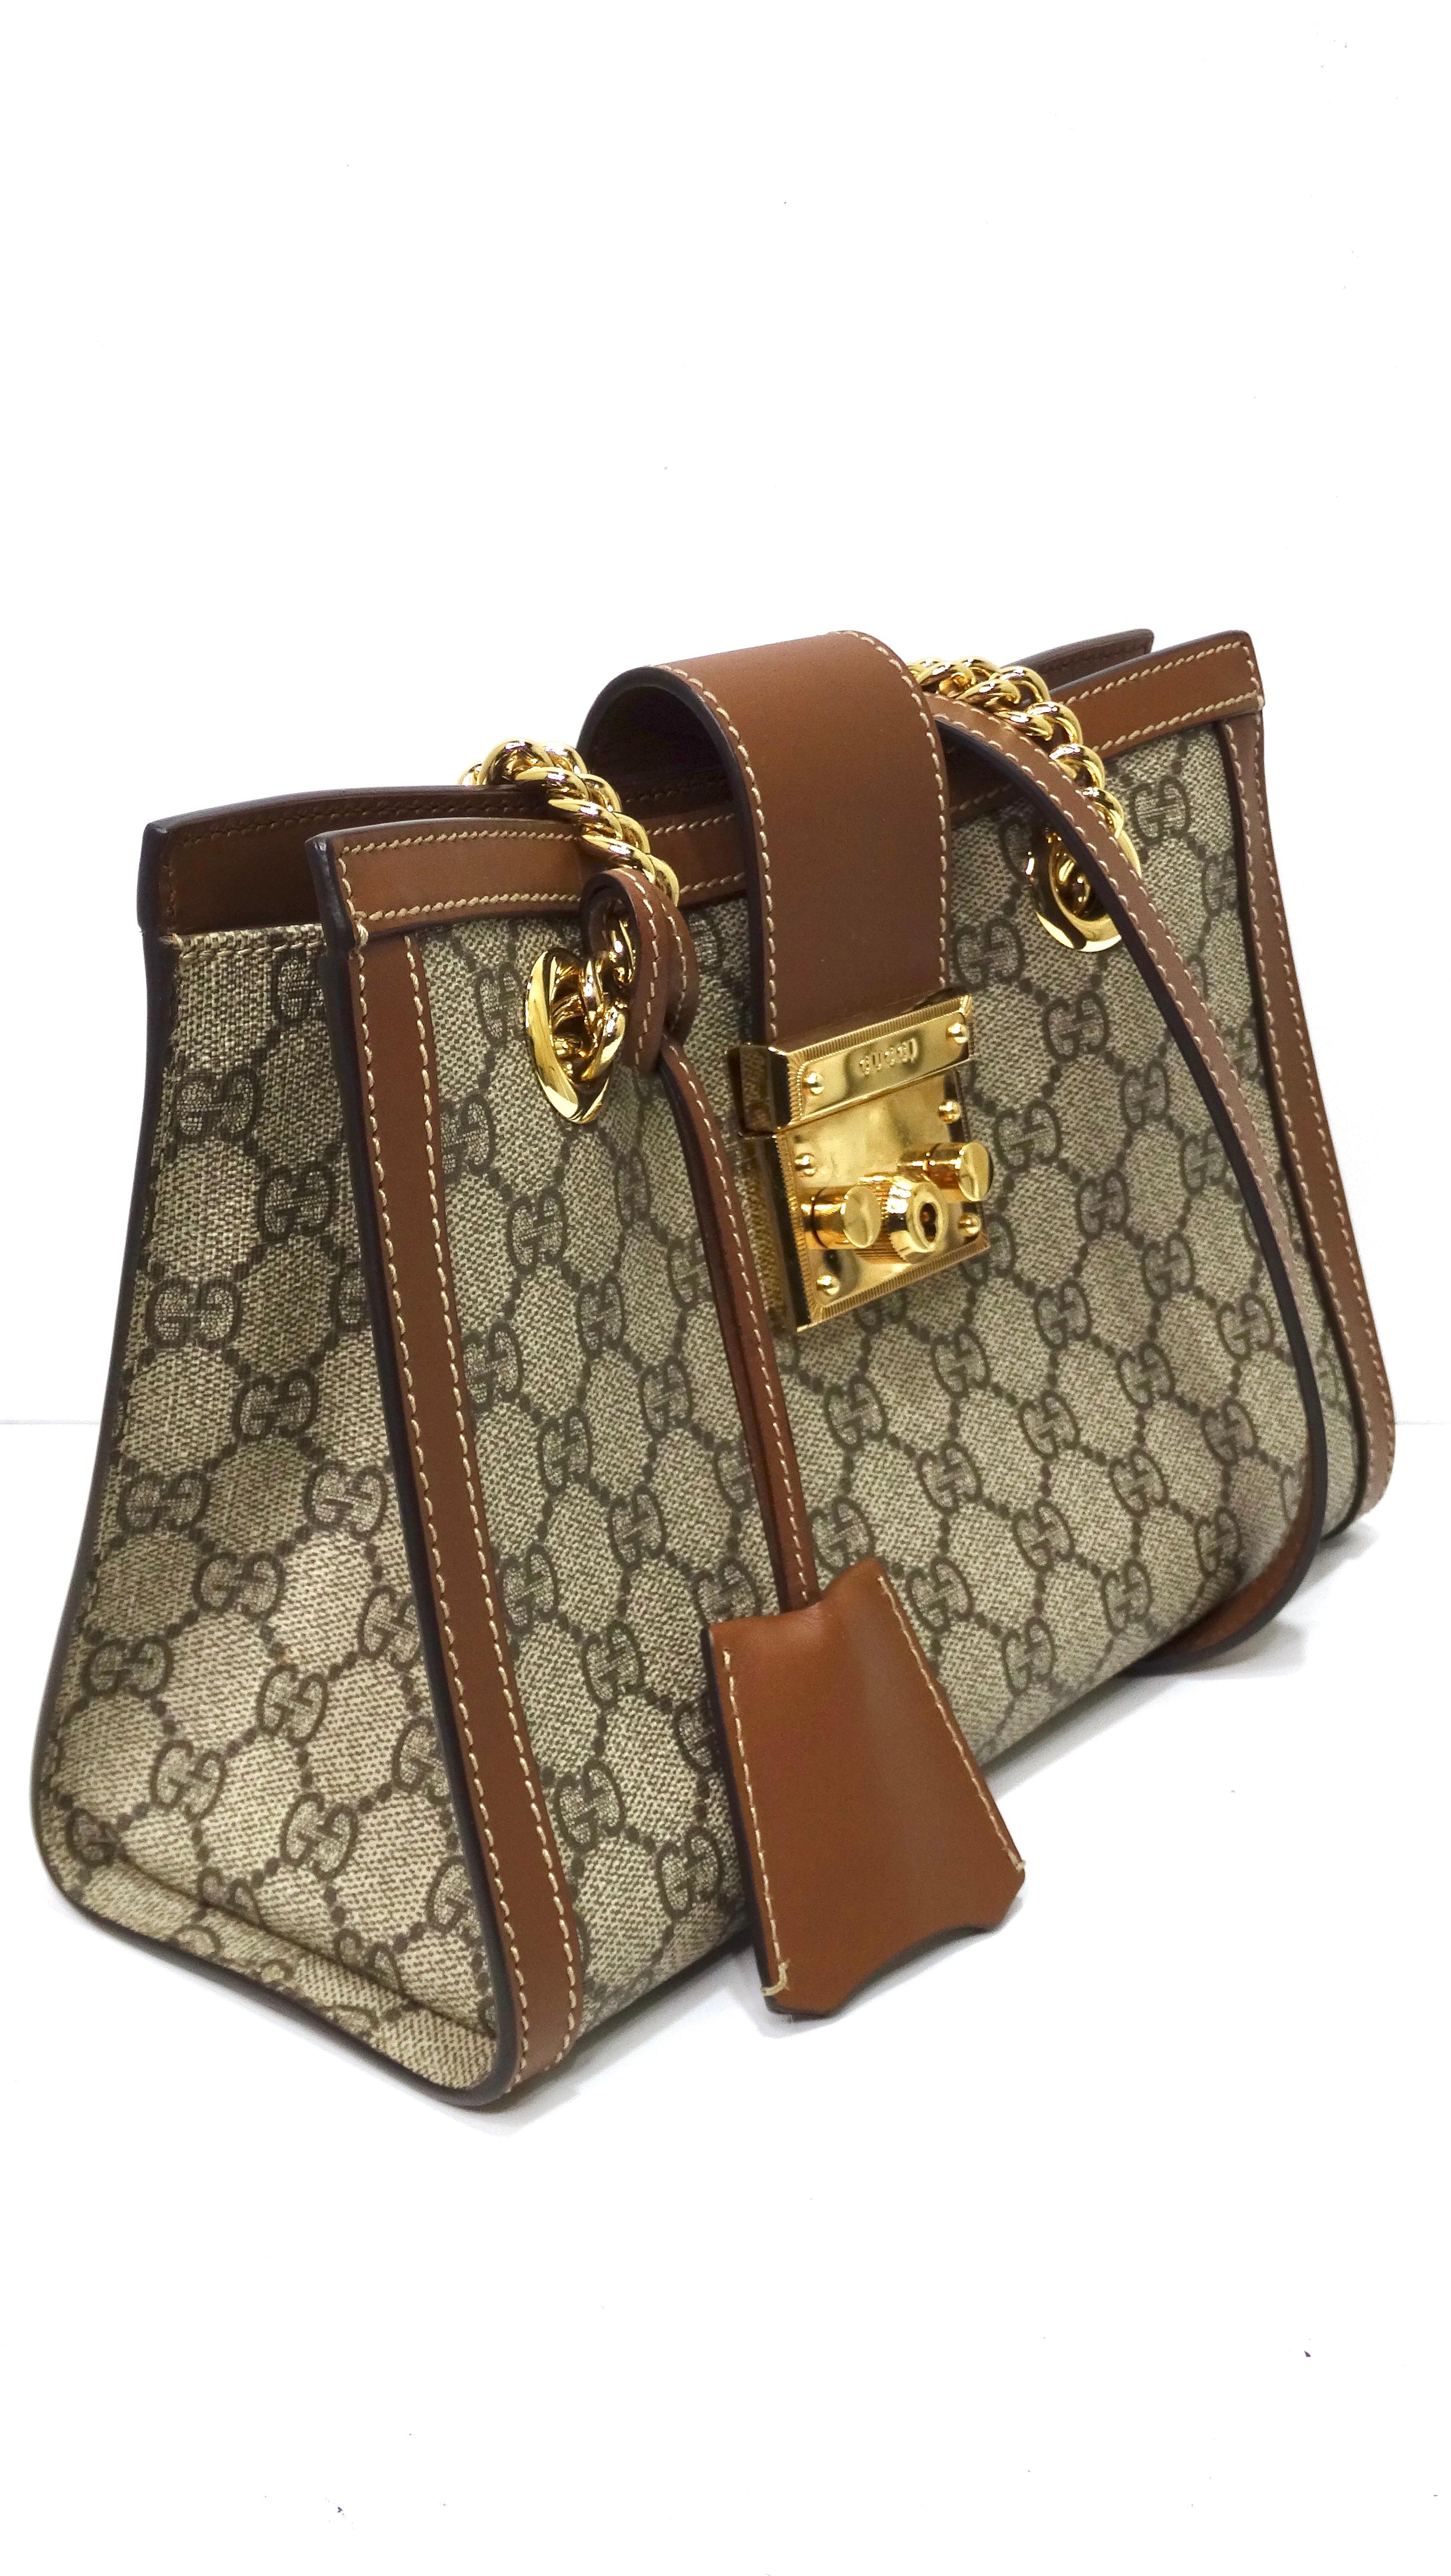 From none other than the house of Gucci! Get your piece of the iconic fashion house today. This takes the classic monogrammed bag and adds an interesting twist. The monogram is classic to the Gucci brand with 'GG' embedded through the whole